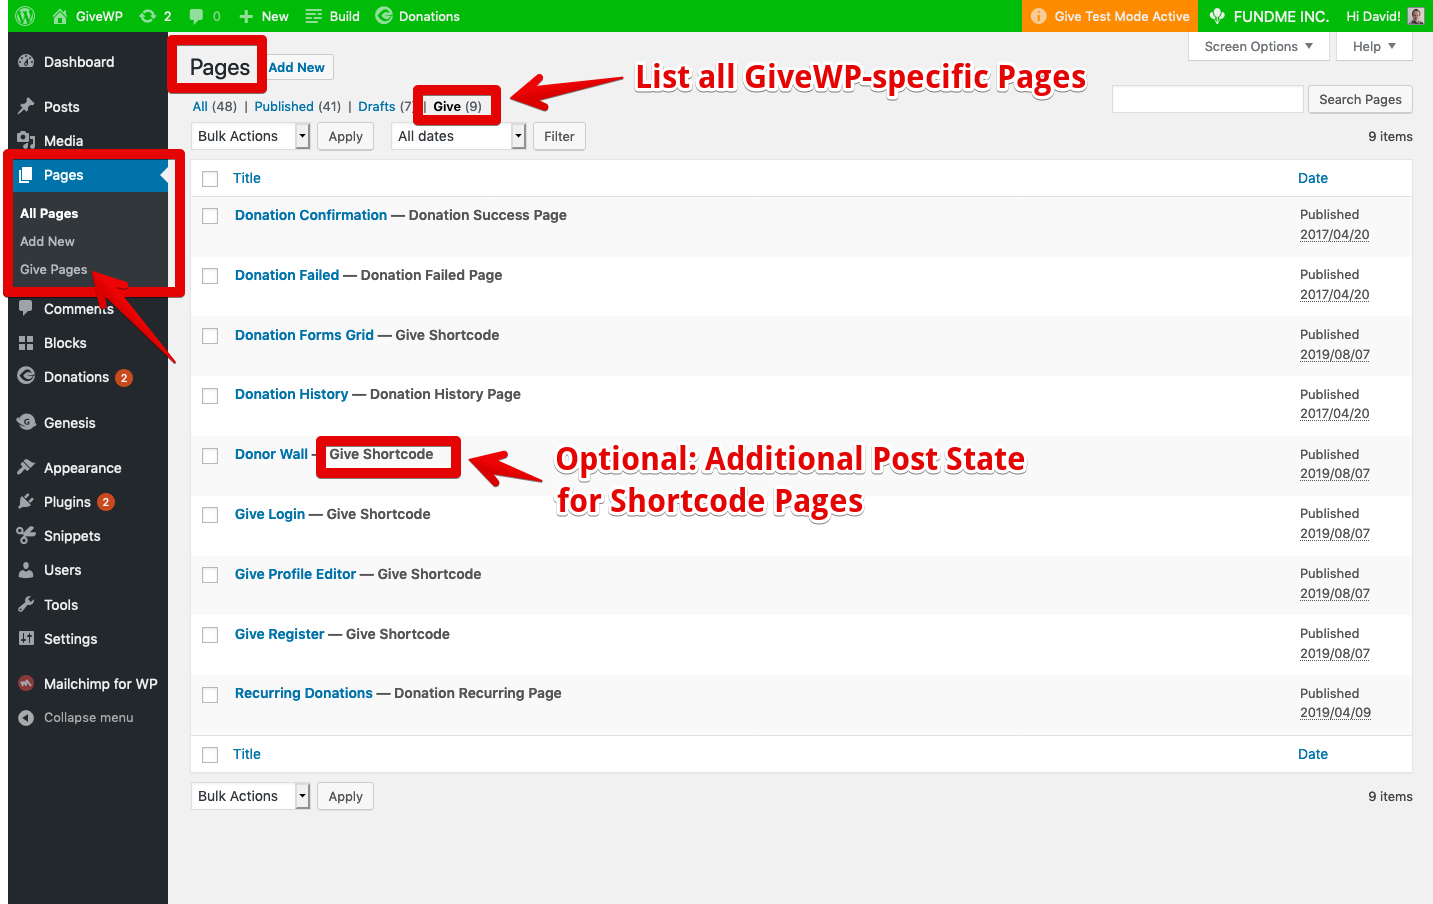 Additional View for all GiveWP Pages, plus Optional Post State for Shortcode Pages